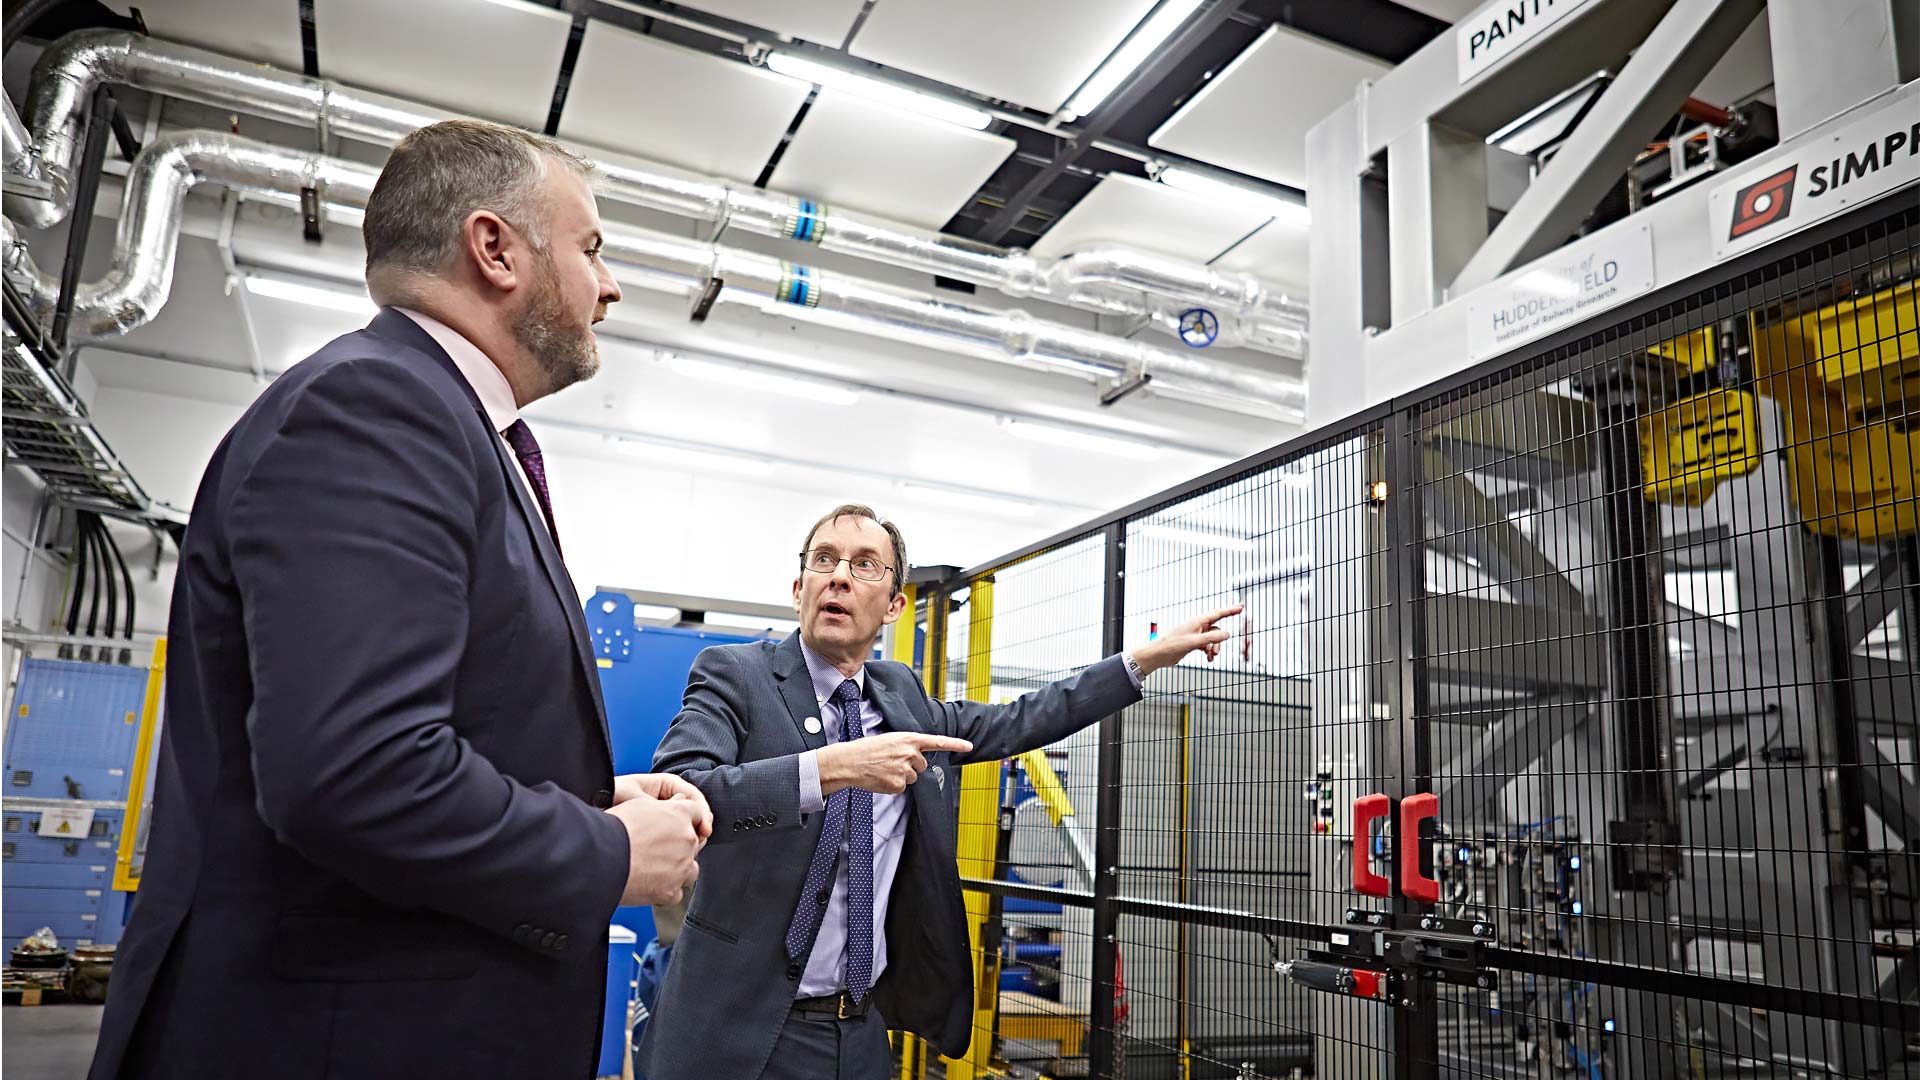 Professor Simon Iwnicki with Andrew Stephenson MP talking about the High Speed Pantograph Testing Rig